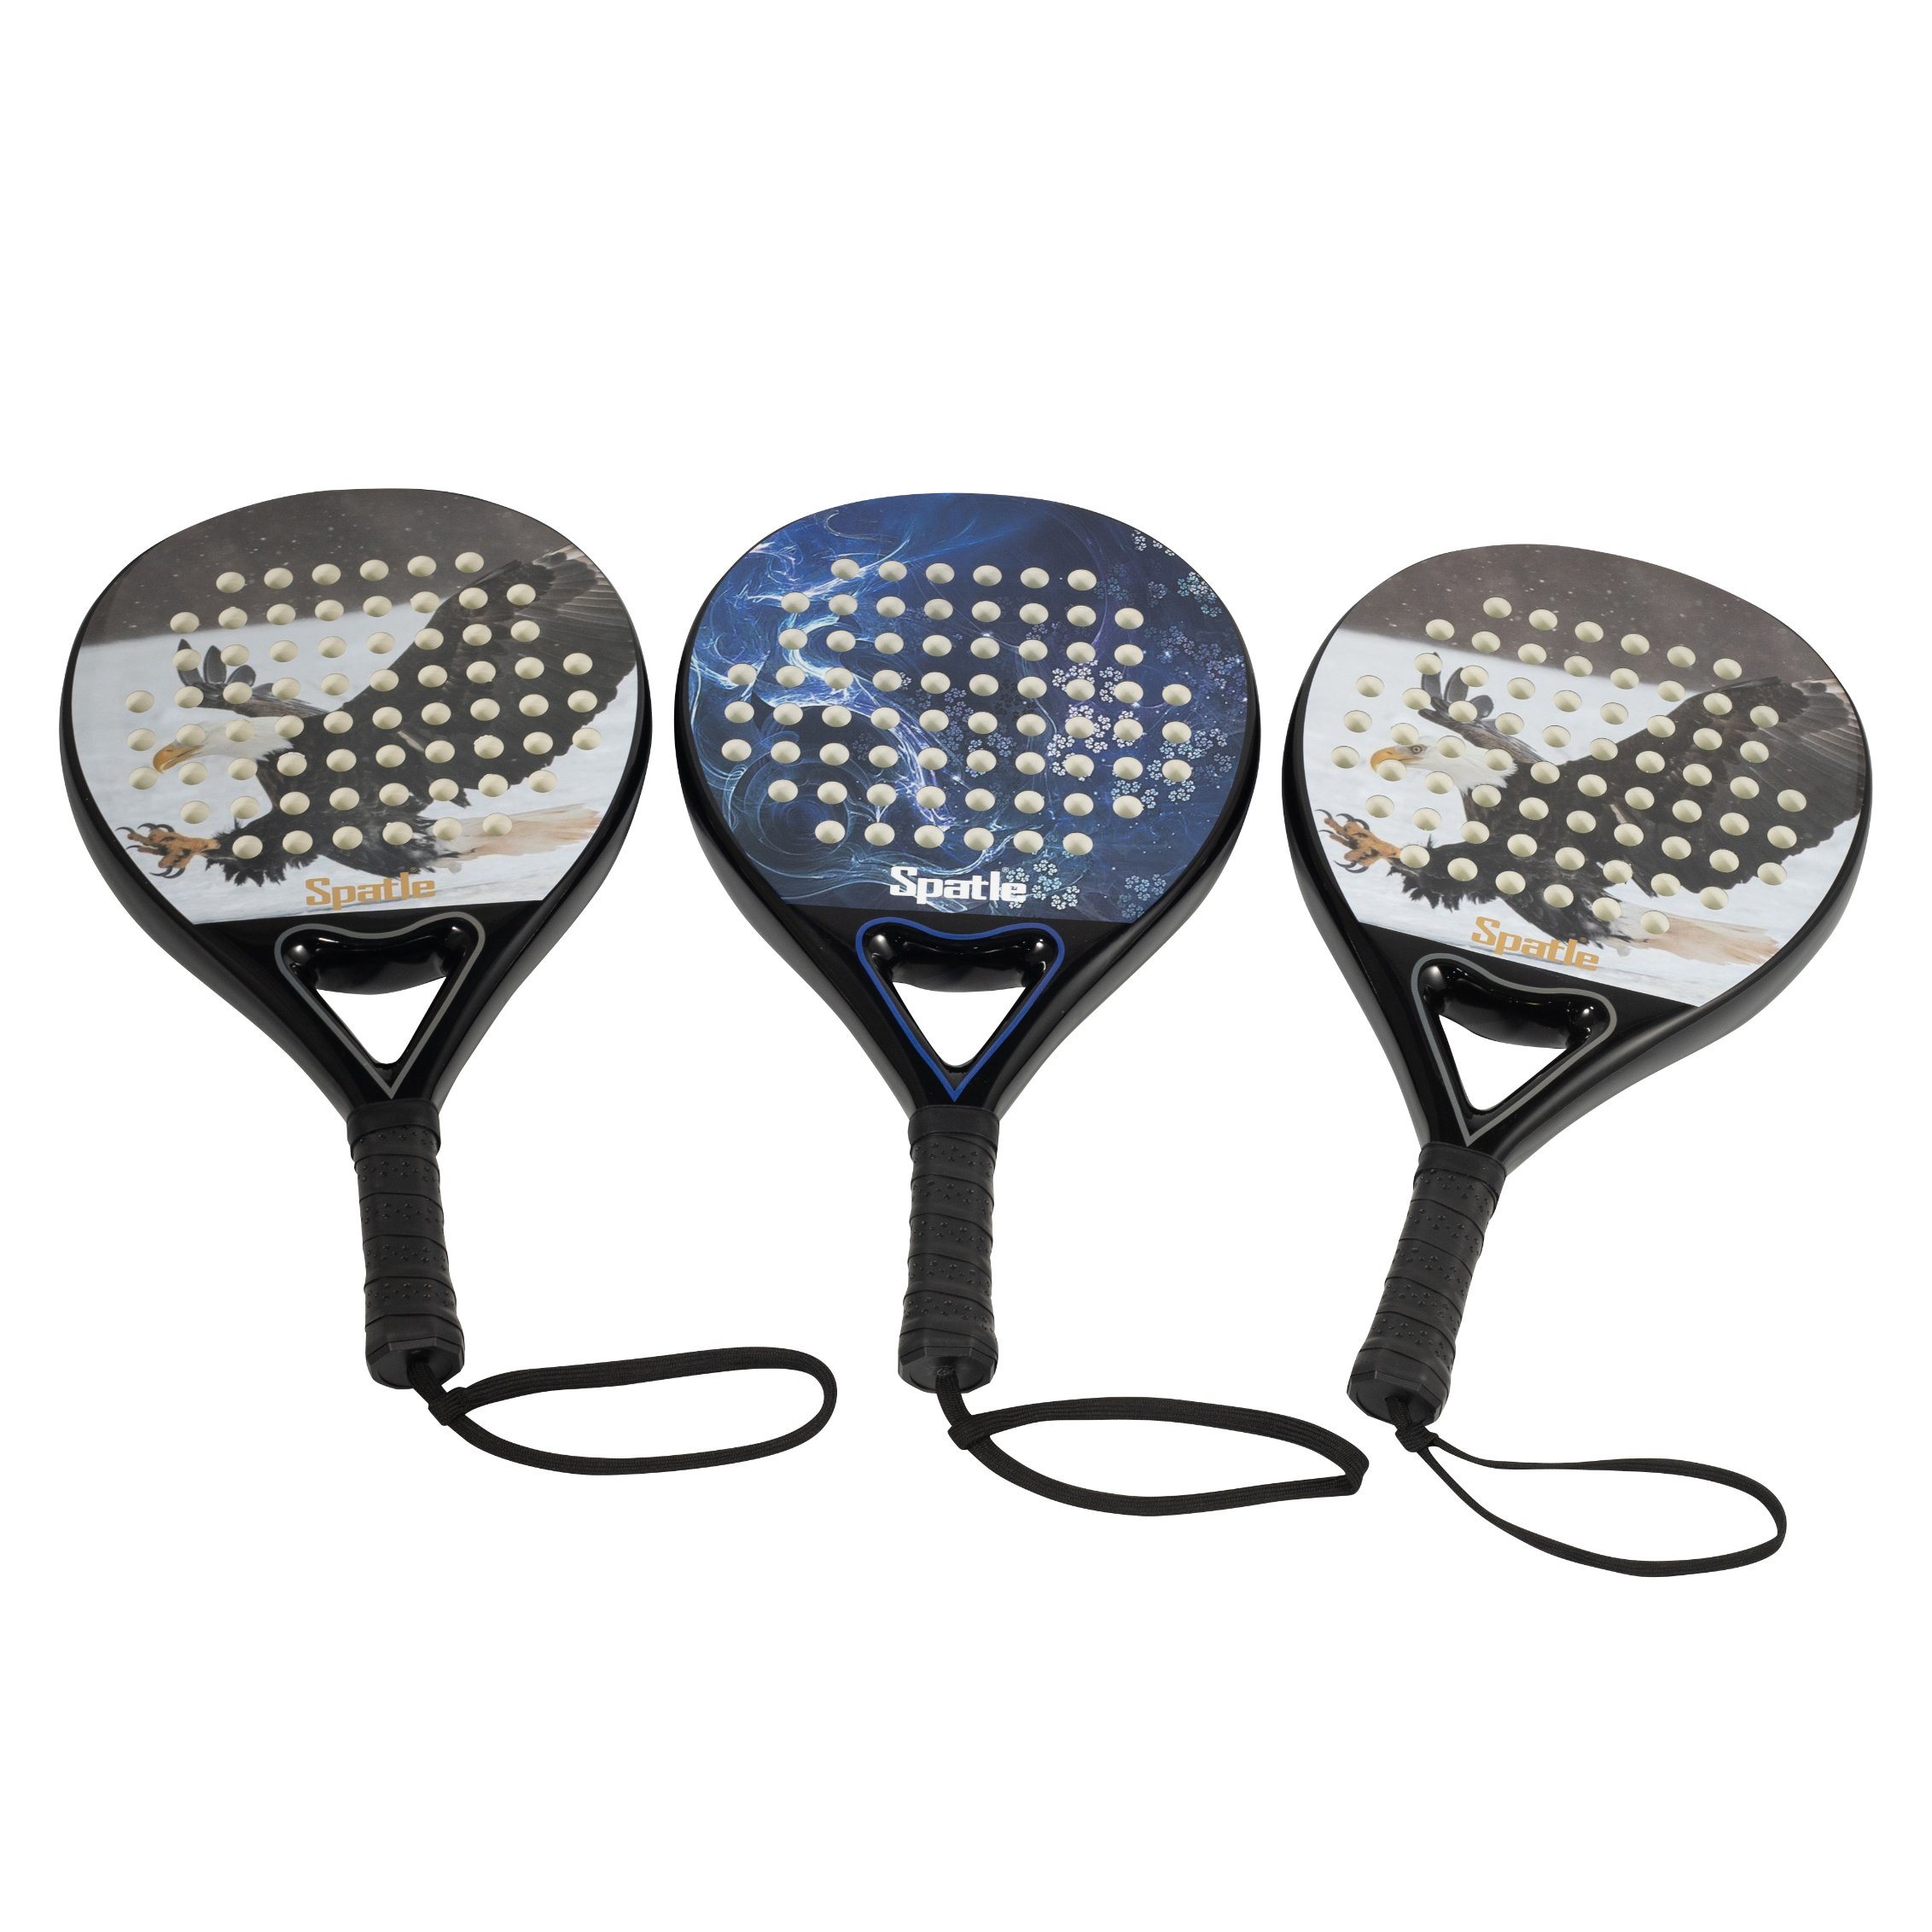 Customized Pala Paddle Racket With Glass fiber material